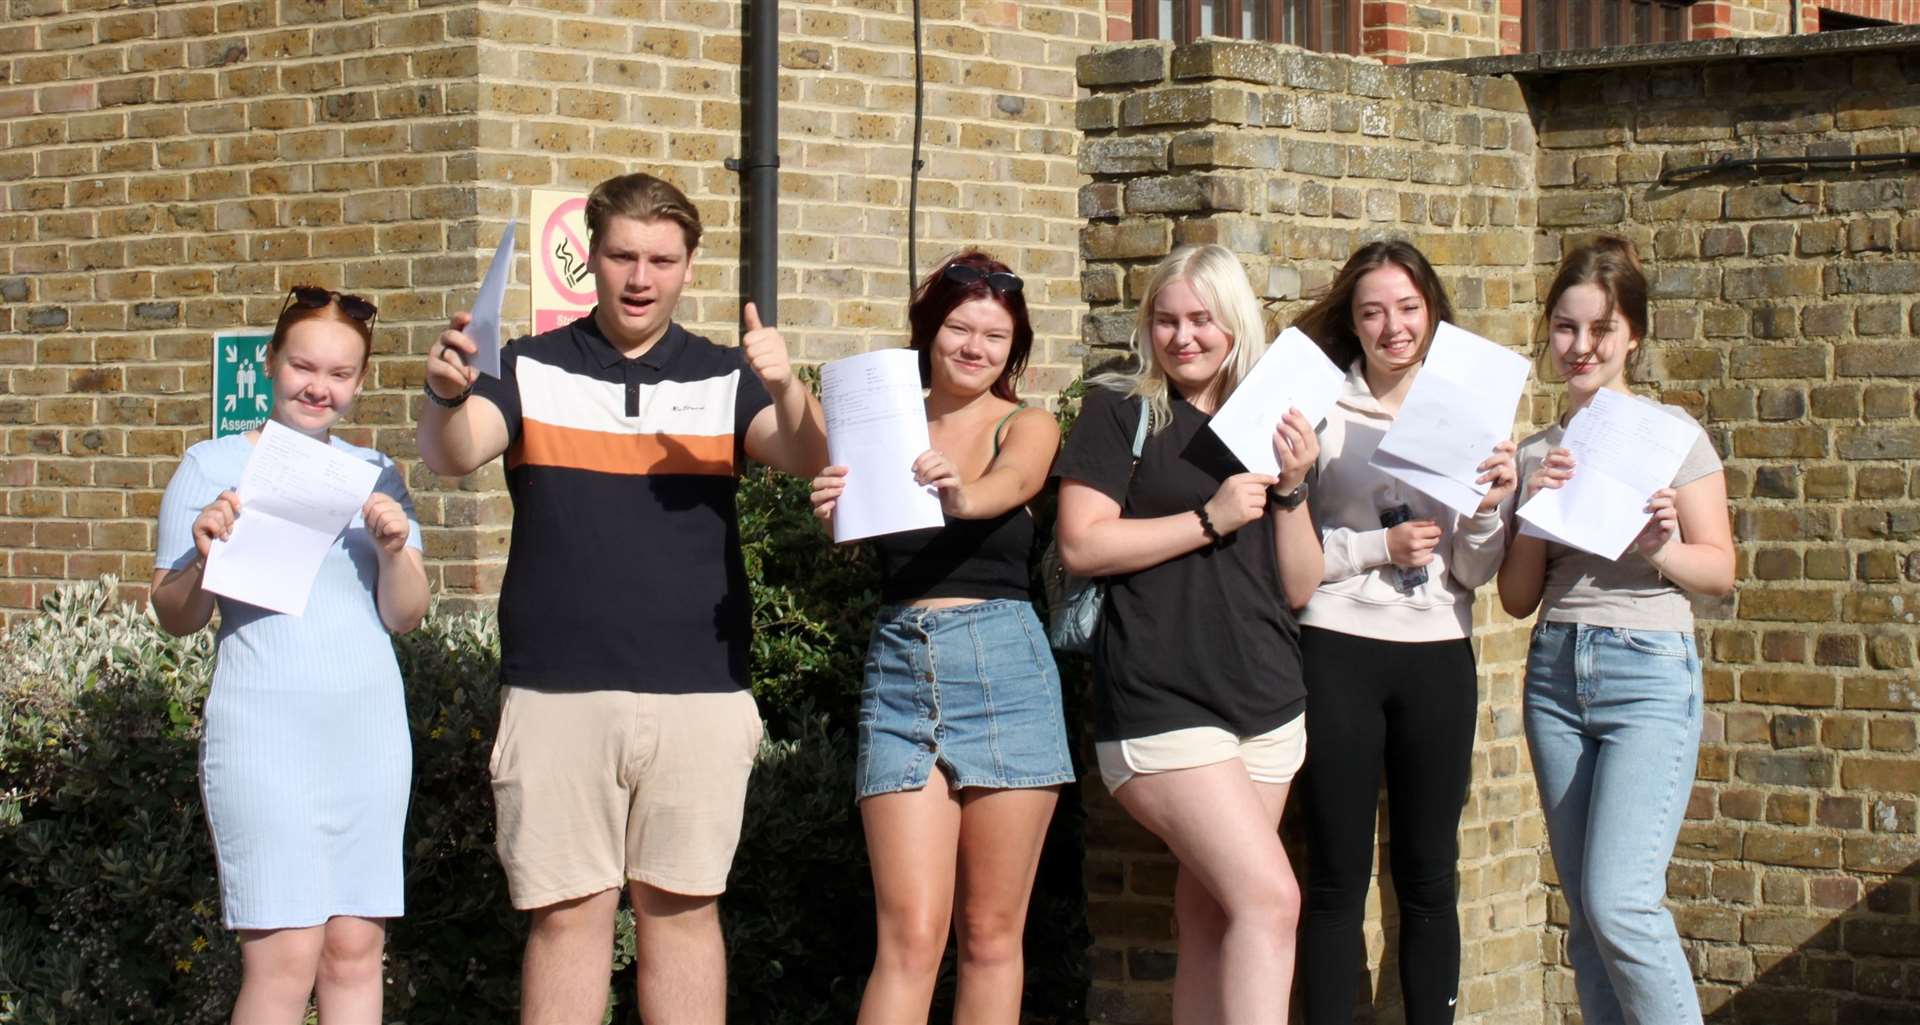 Students at Ursuline College in Westgate-on-Sea receiving their A-level and BTEC results